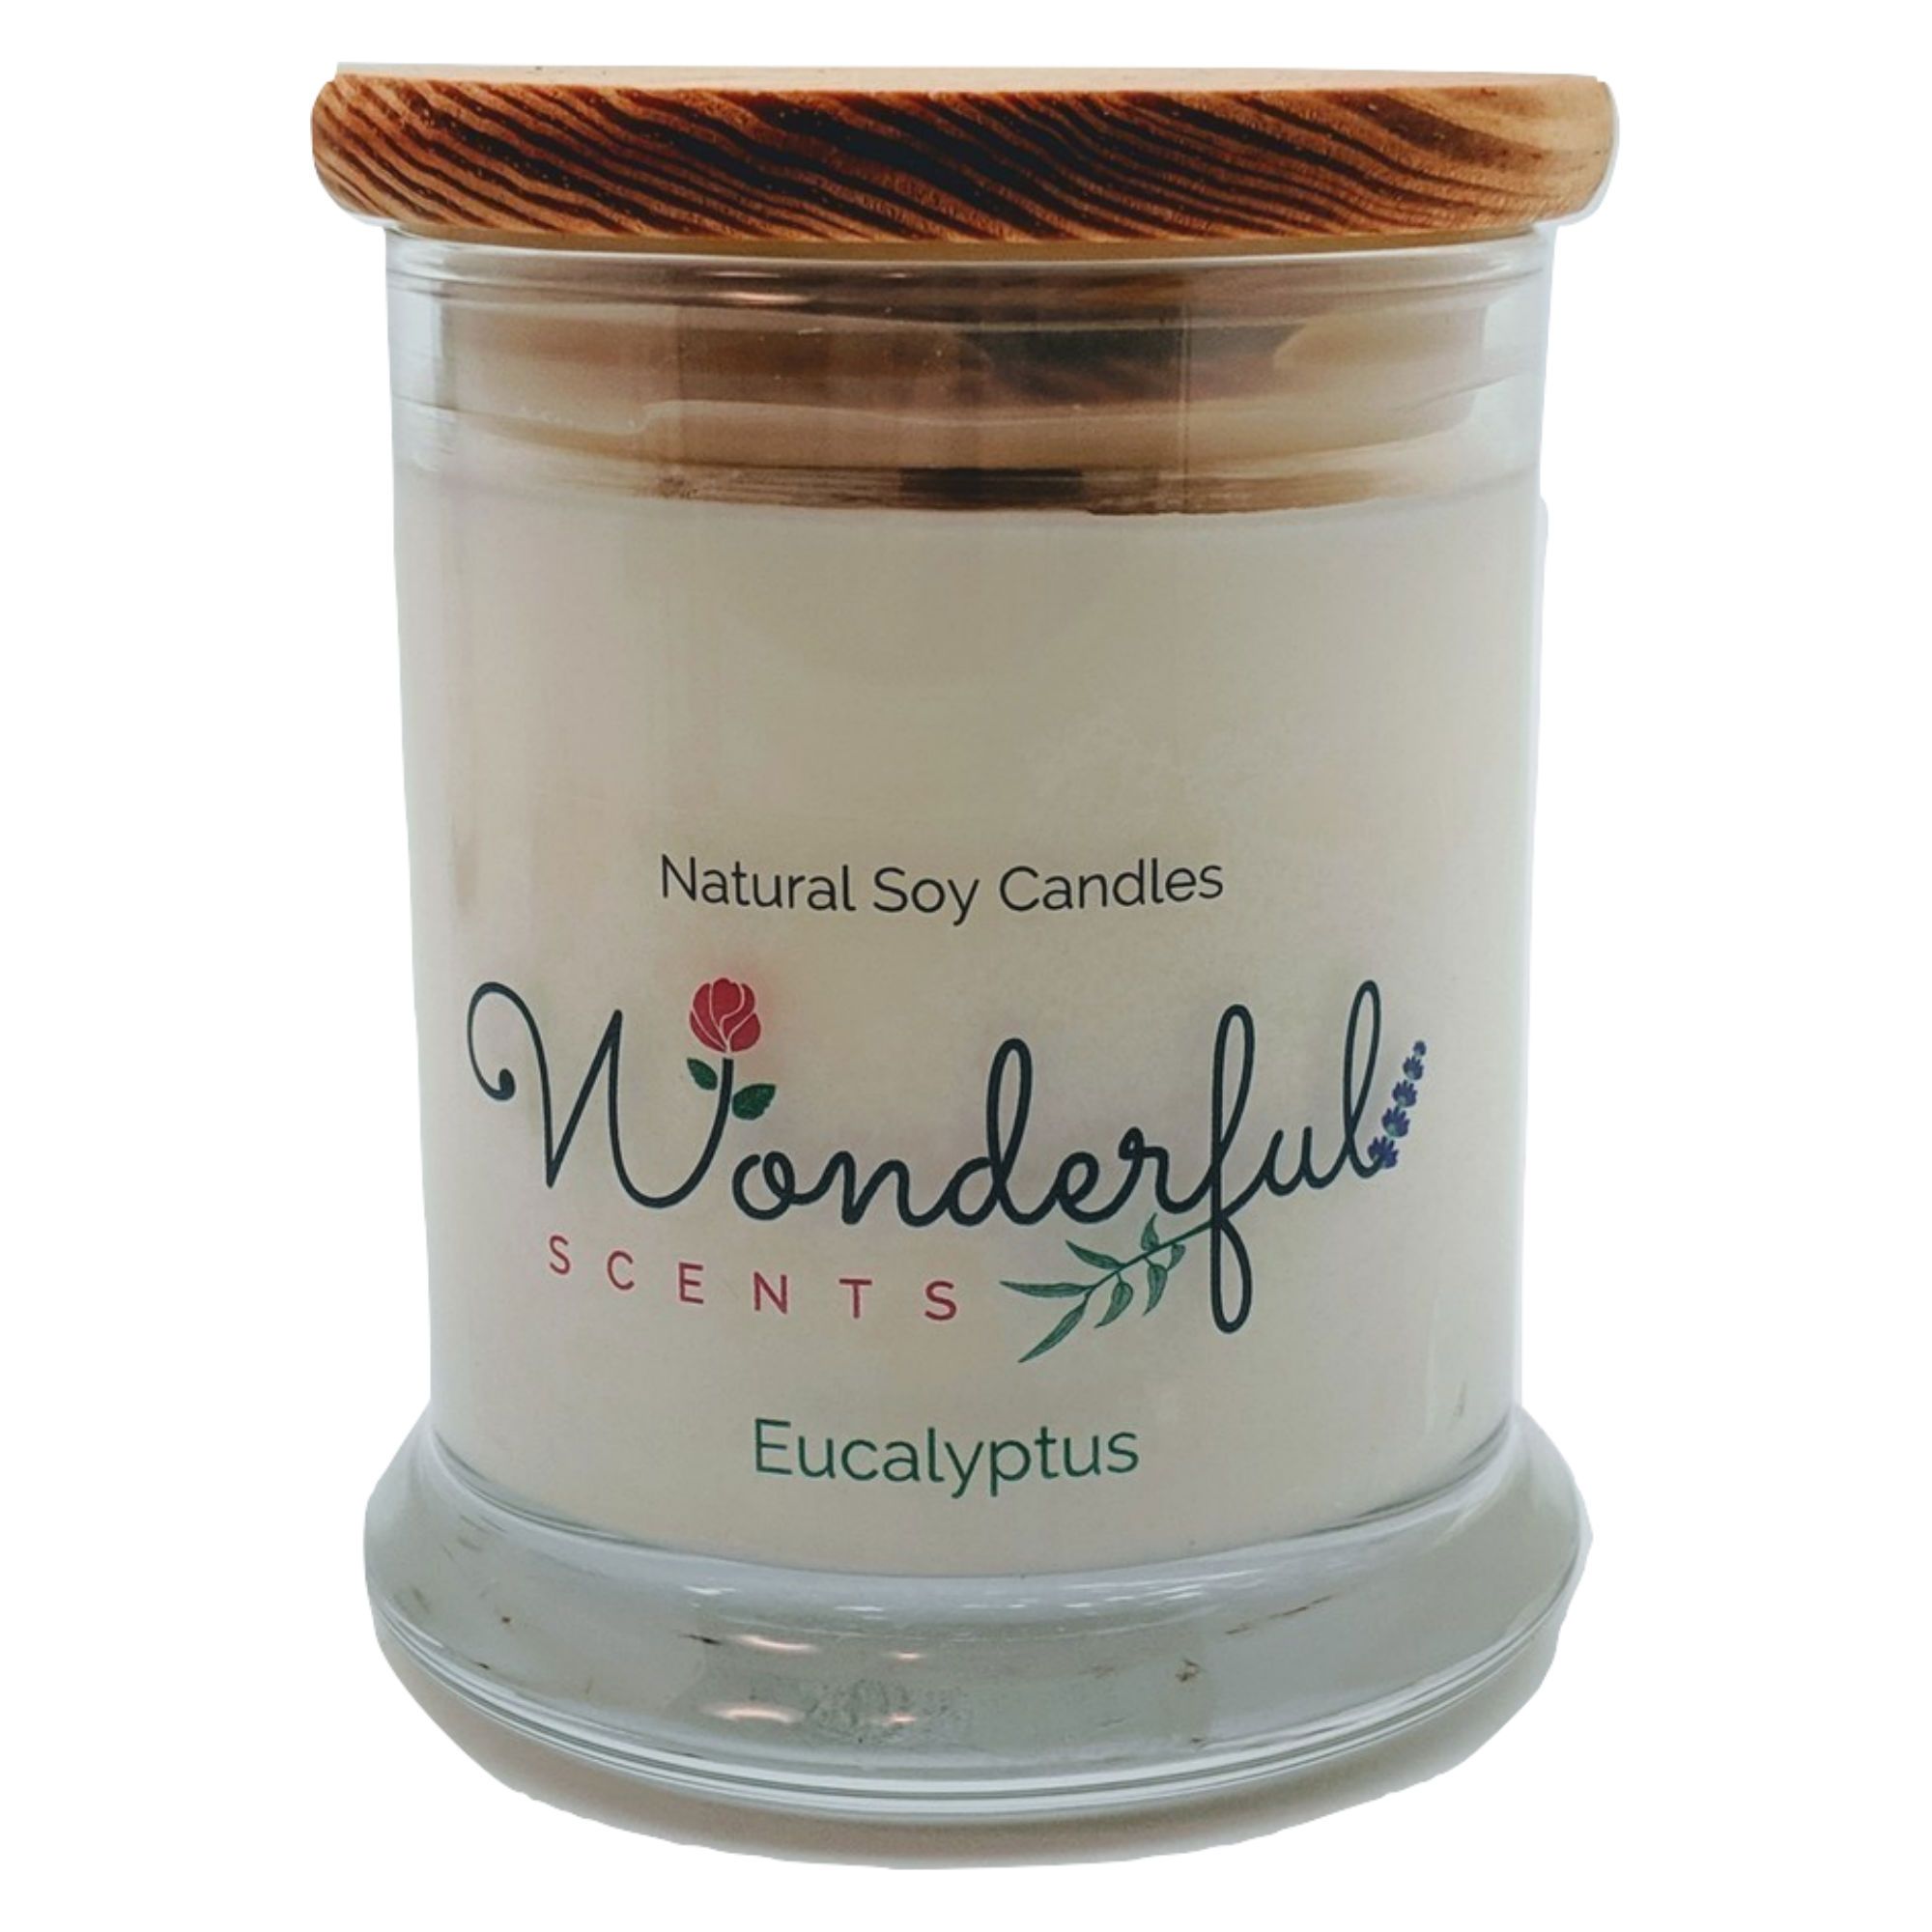 12 oz Hand Poured Soy Wax Candle Wood Wick Status Jar Wood or Tin Lid